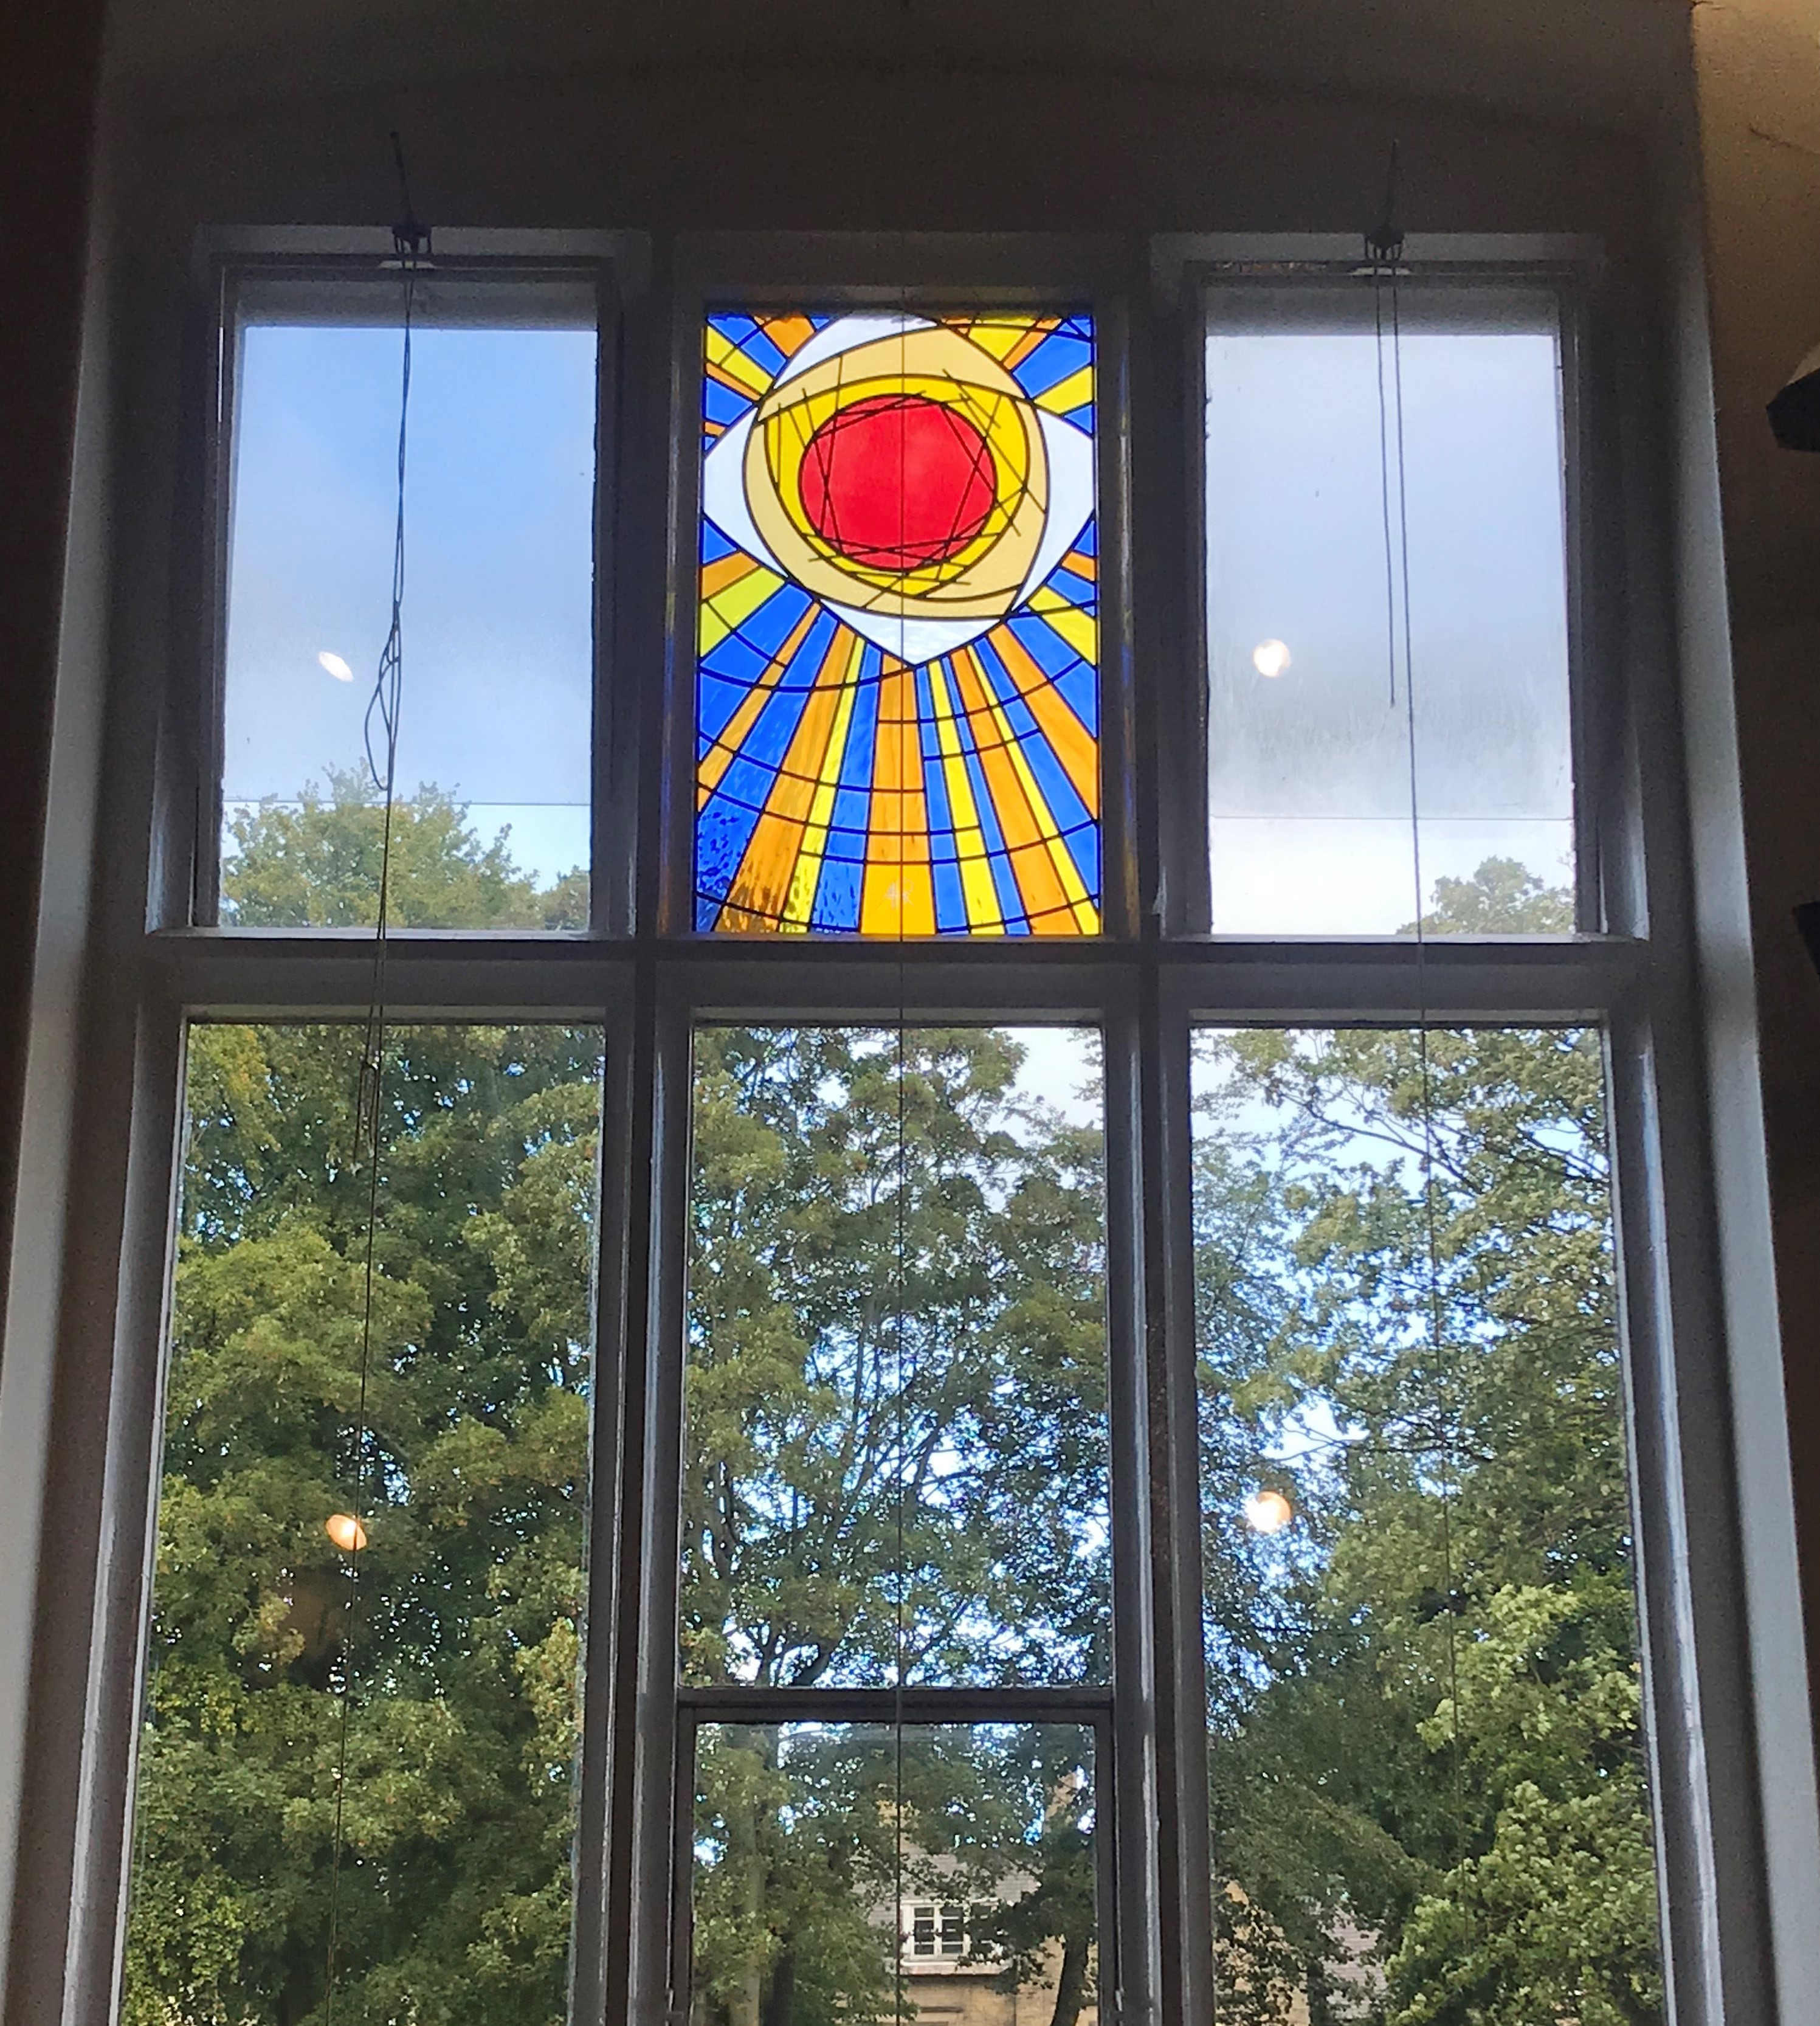 Our Alex Reid Memorial Window in the Main Hall looked beautiful with the sun shining through.